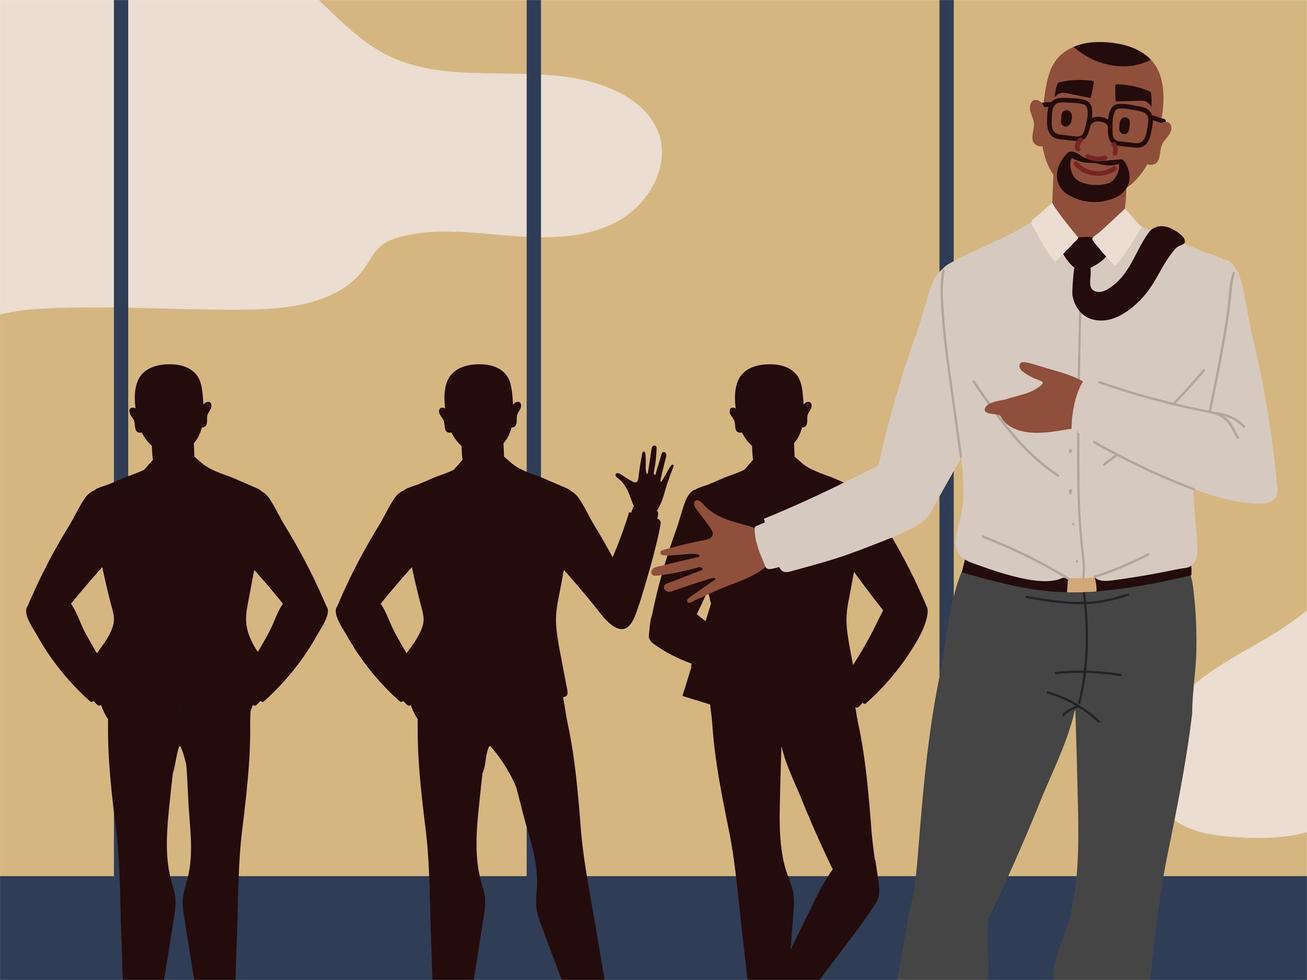 black businessman and people vector